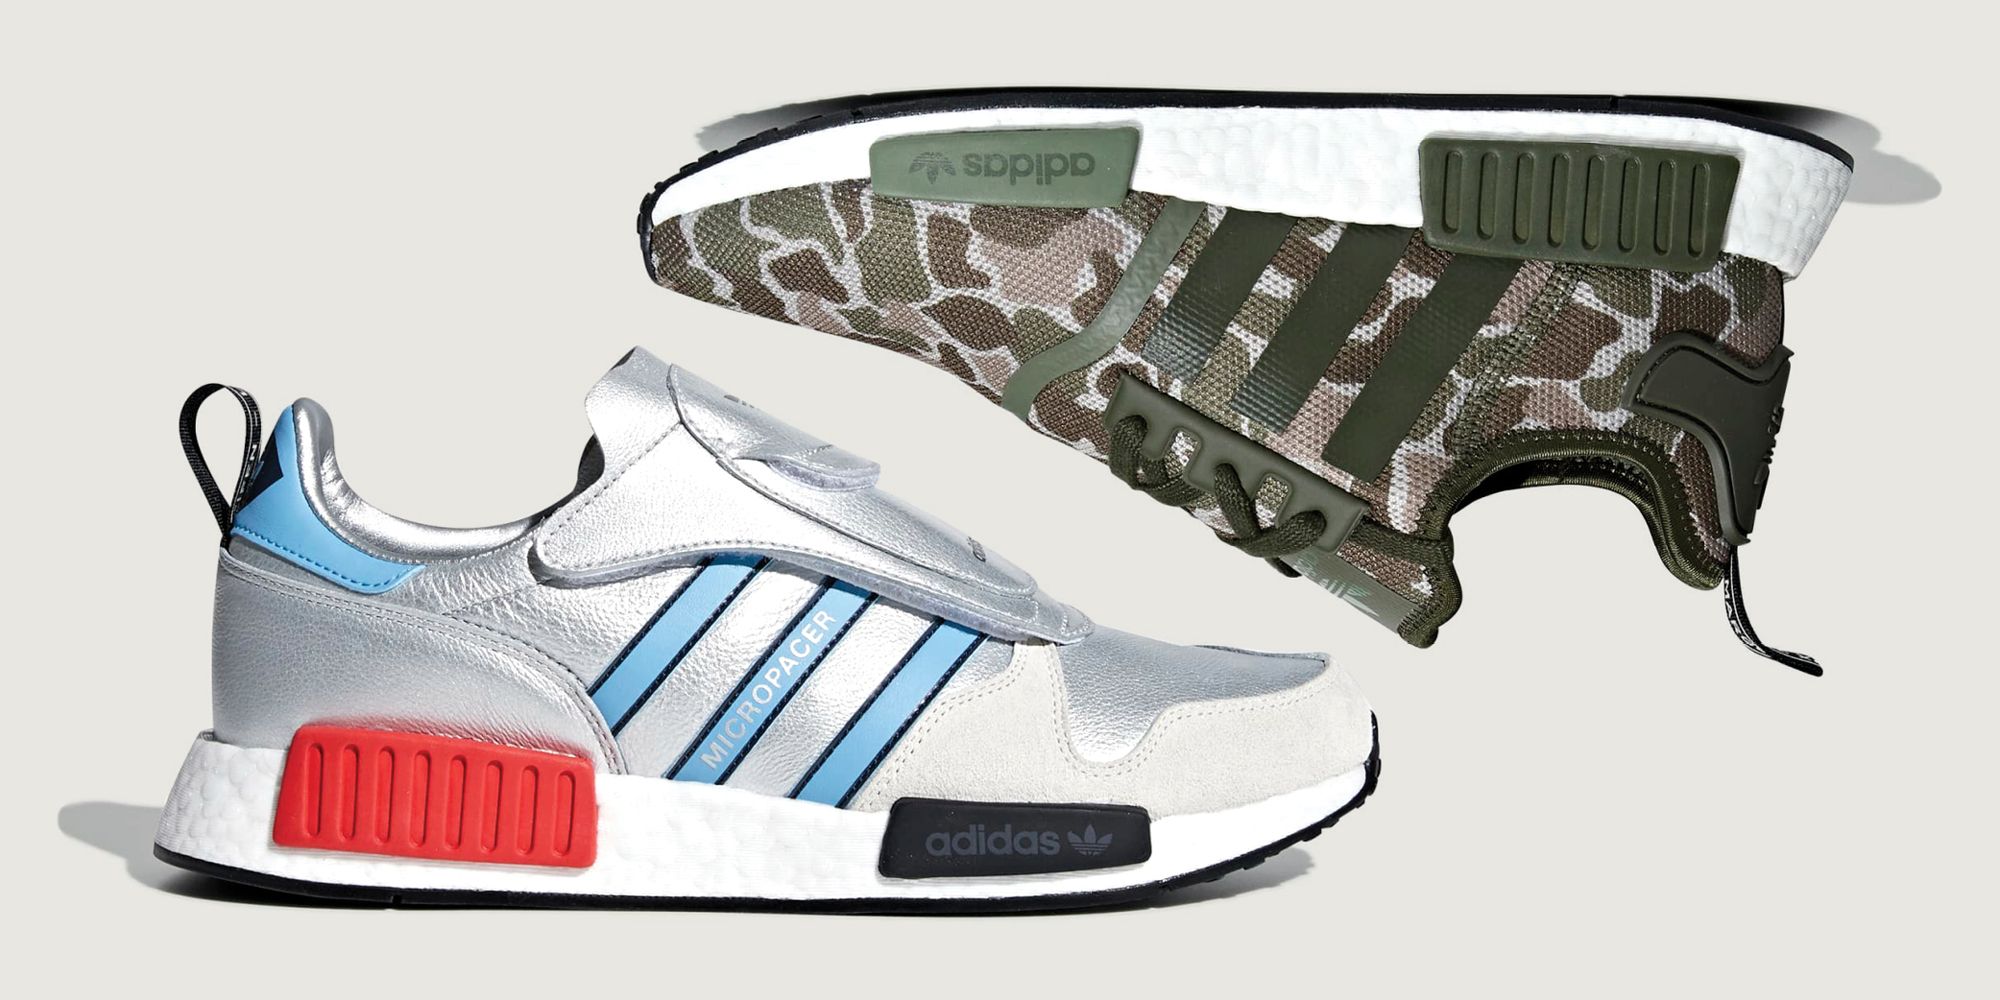 Adidas NMD Releases | Adidas 2018